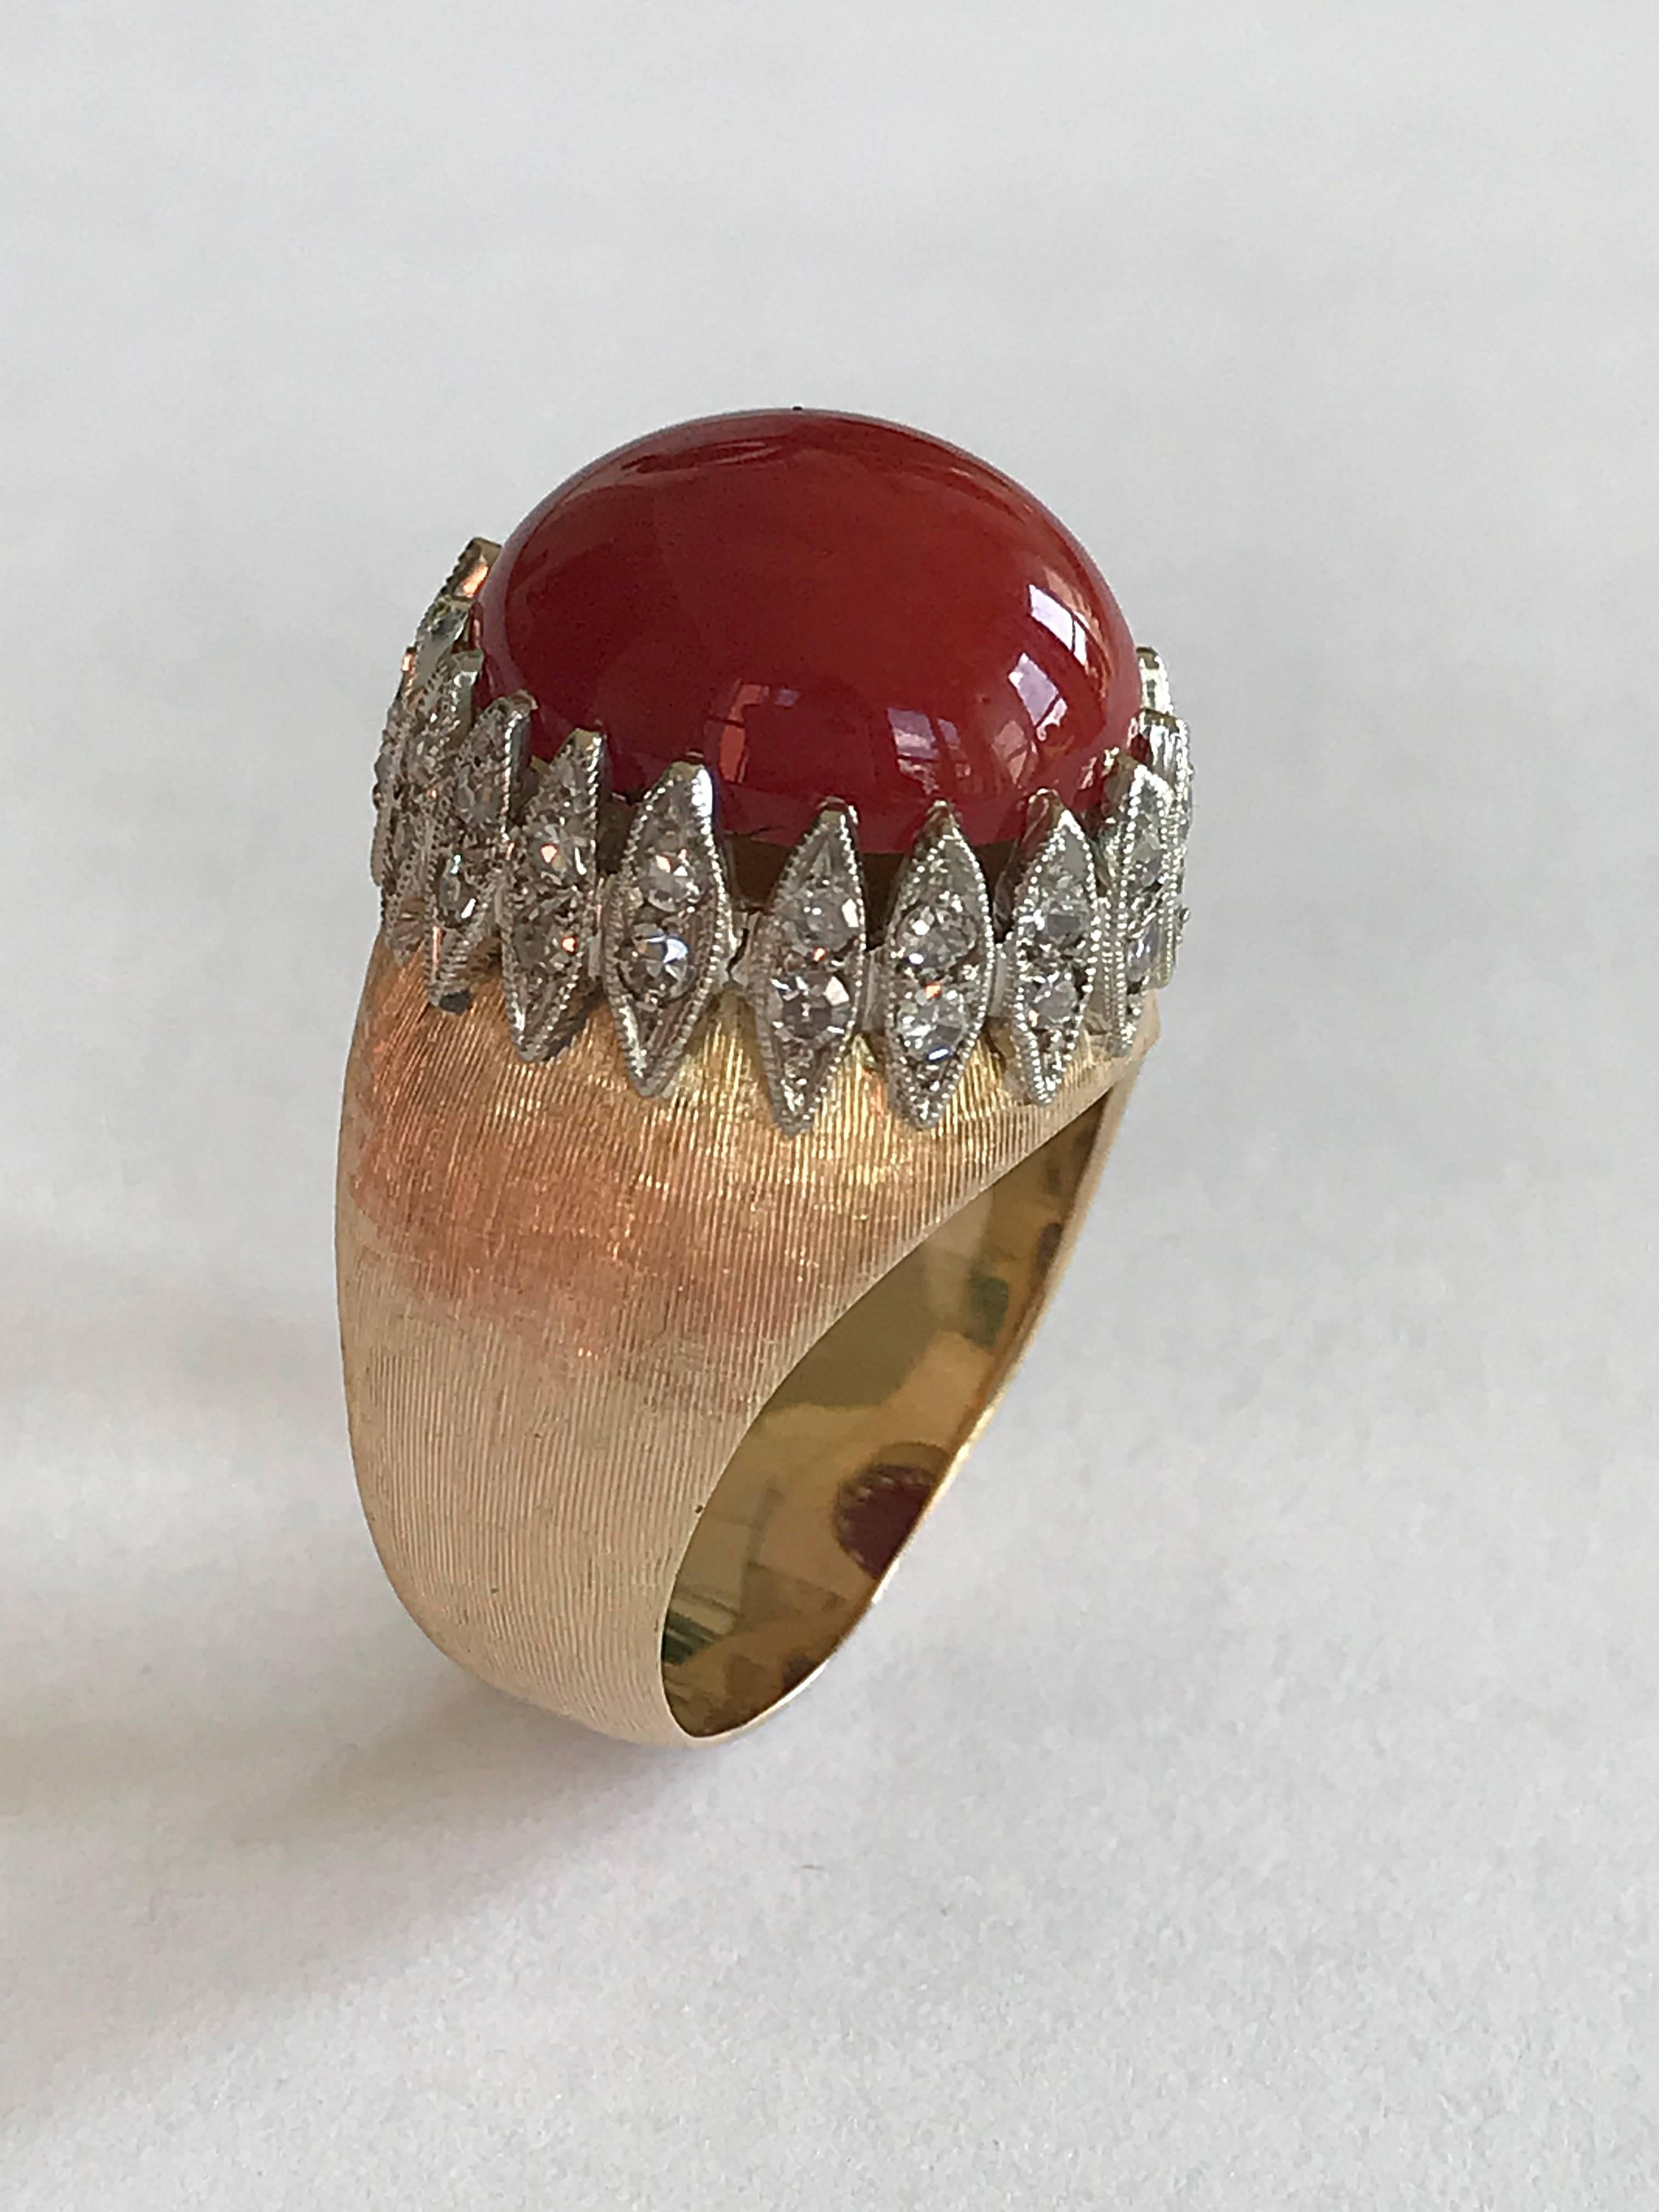 Vintage Italian warm yellow and white gold ring with 36 diamond weighting circa 0,5 carat and a red natural mediterranean cabochon cut coral “Corallium Rubrum”  weight 6,9 carat.
The ring has been made probably between 1940 and 1950.
The yellow gold